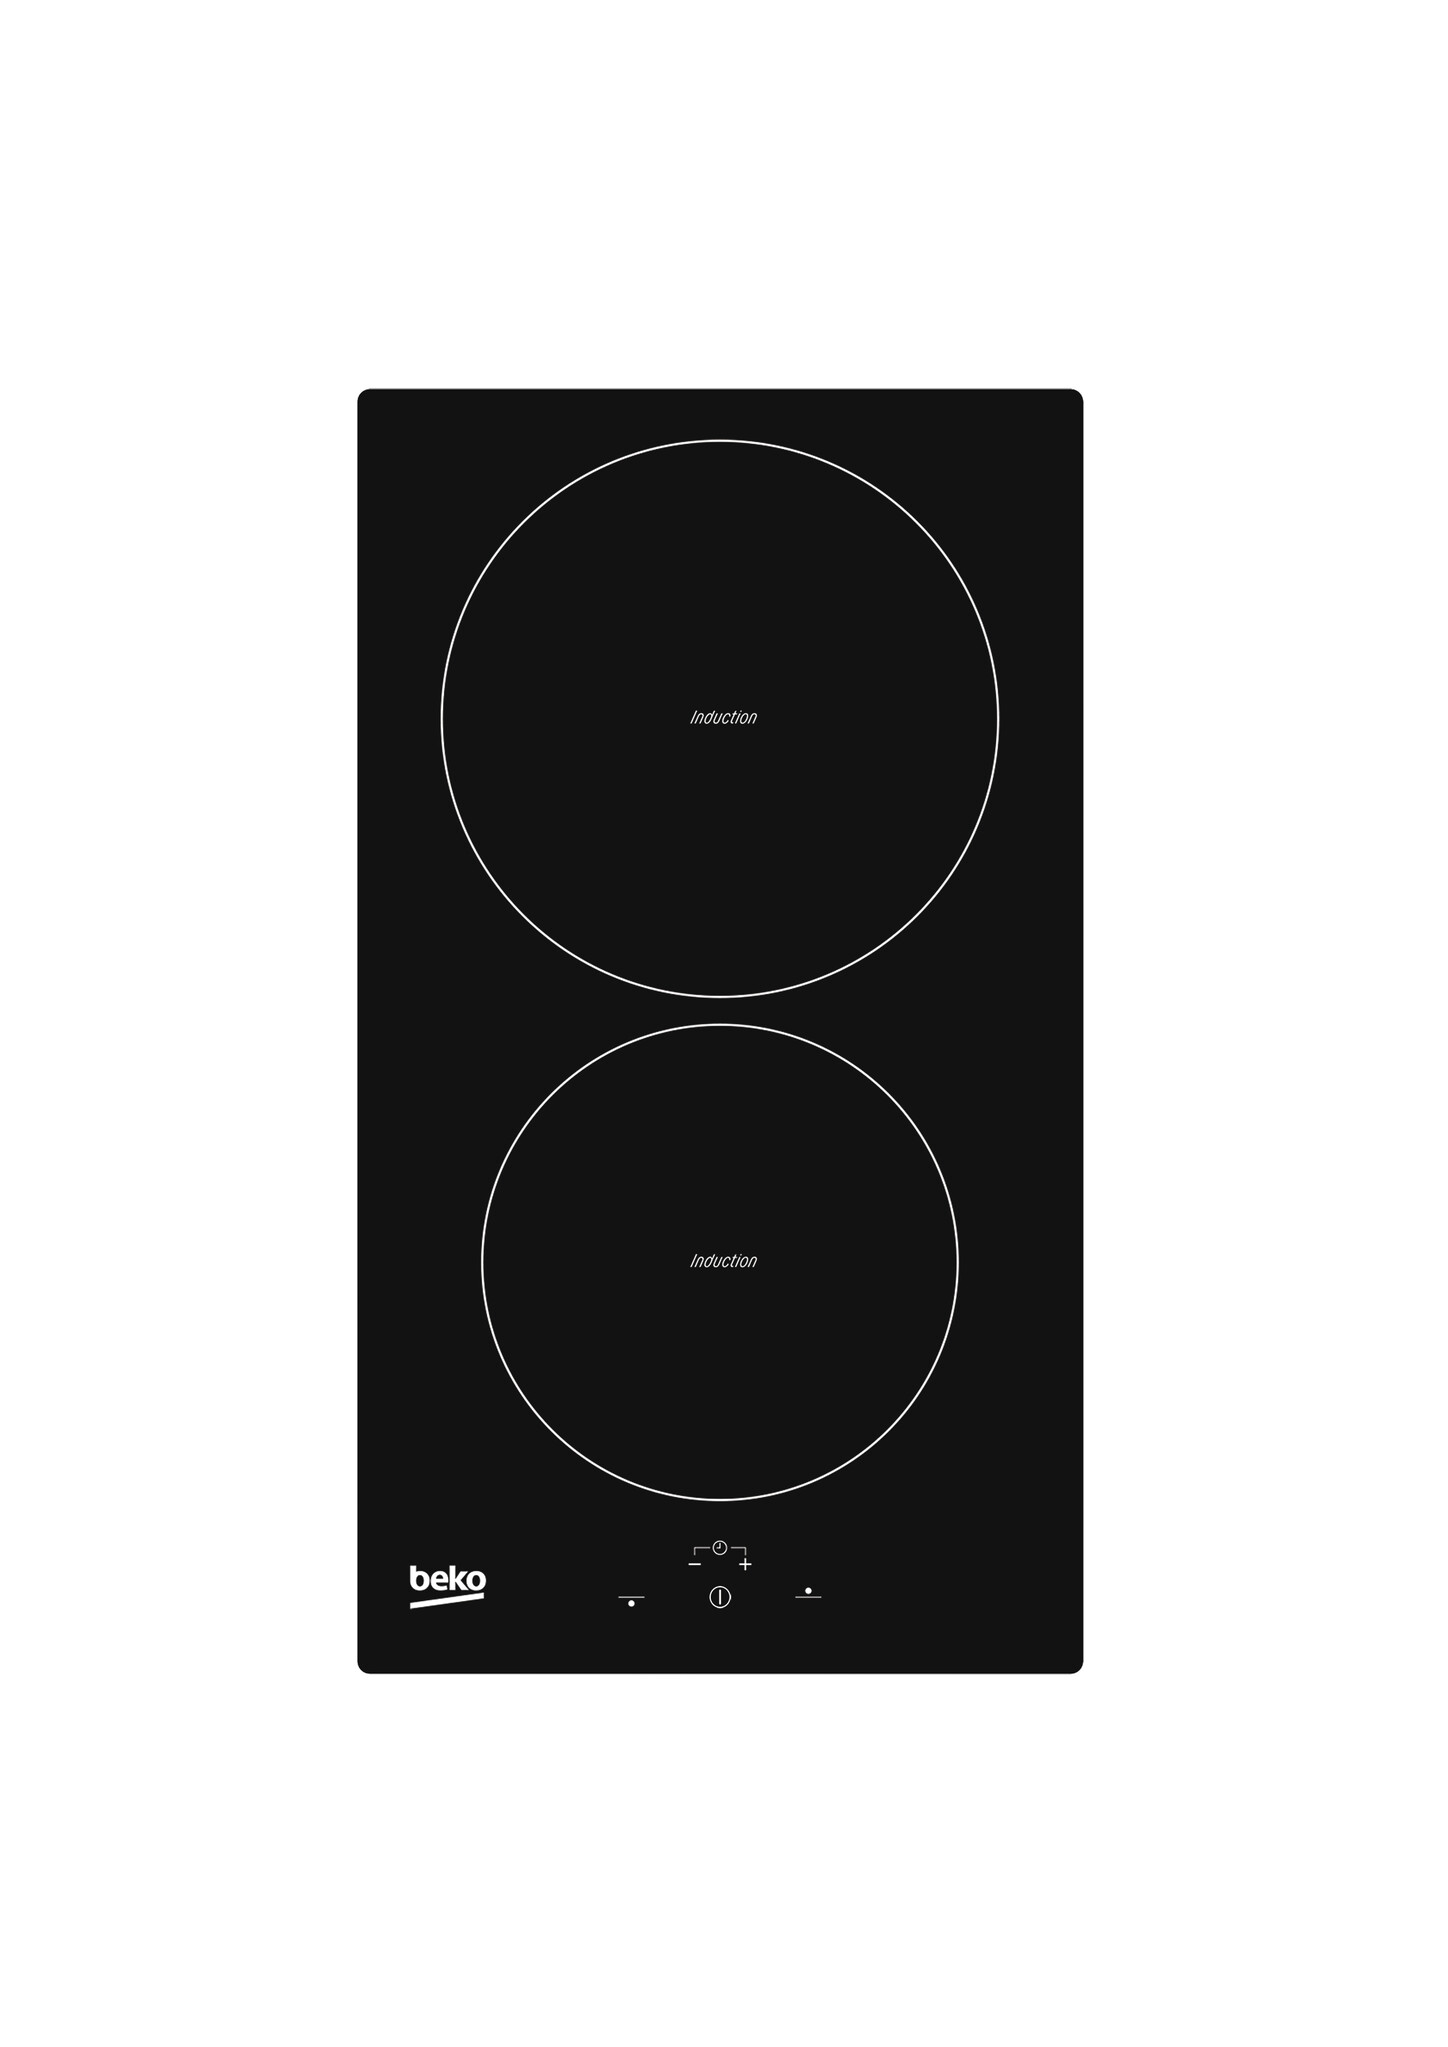 Beko Built-In Induction Hob 30cm HDMI32401DT Touch Control 2 Zones – Black